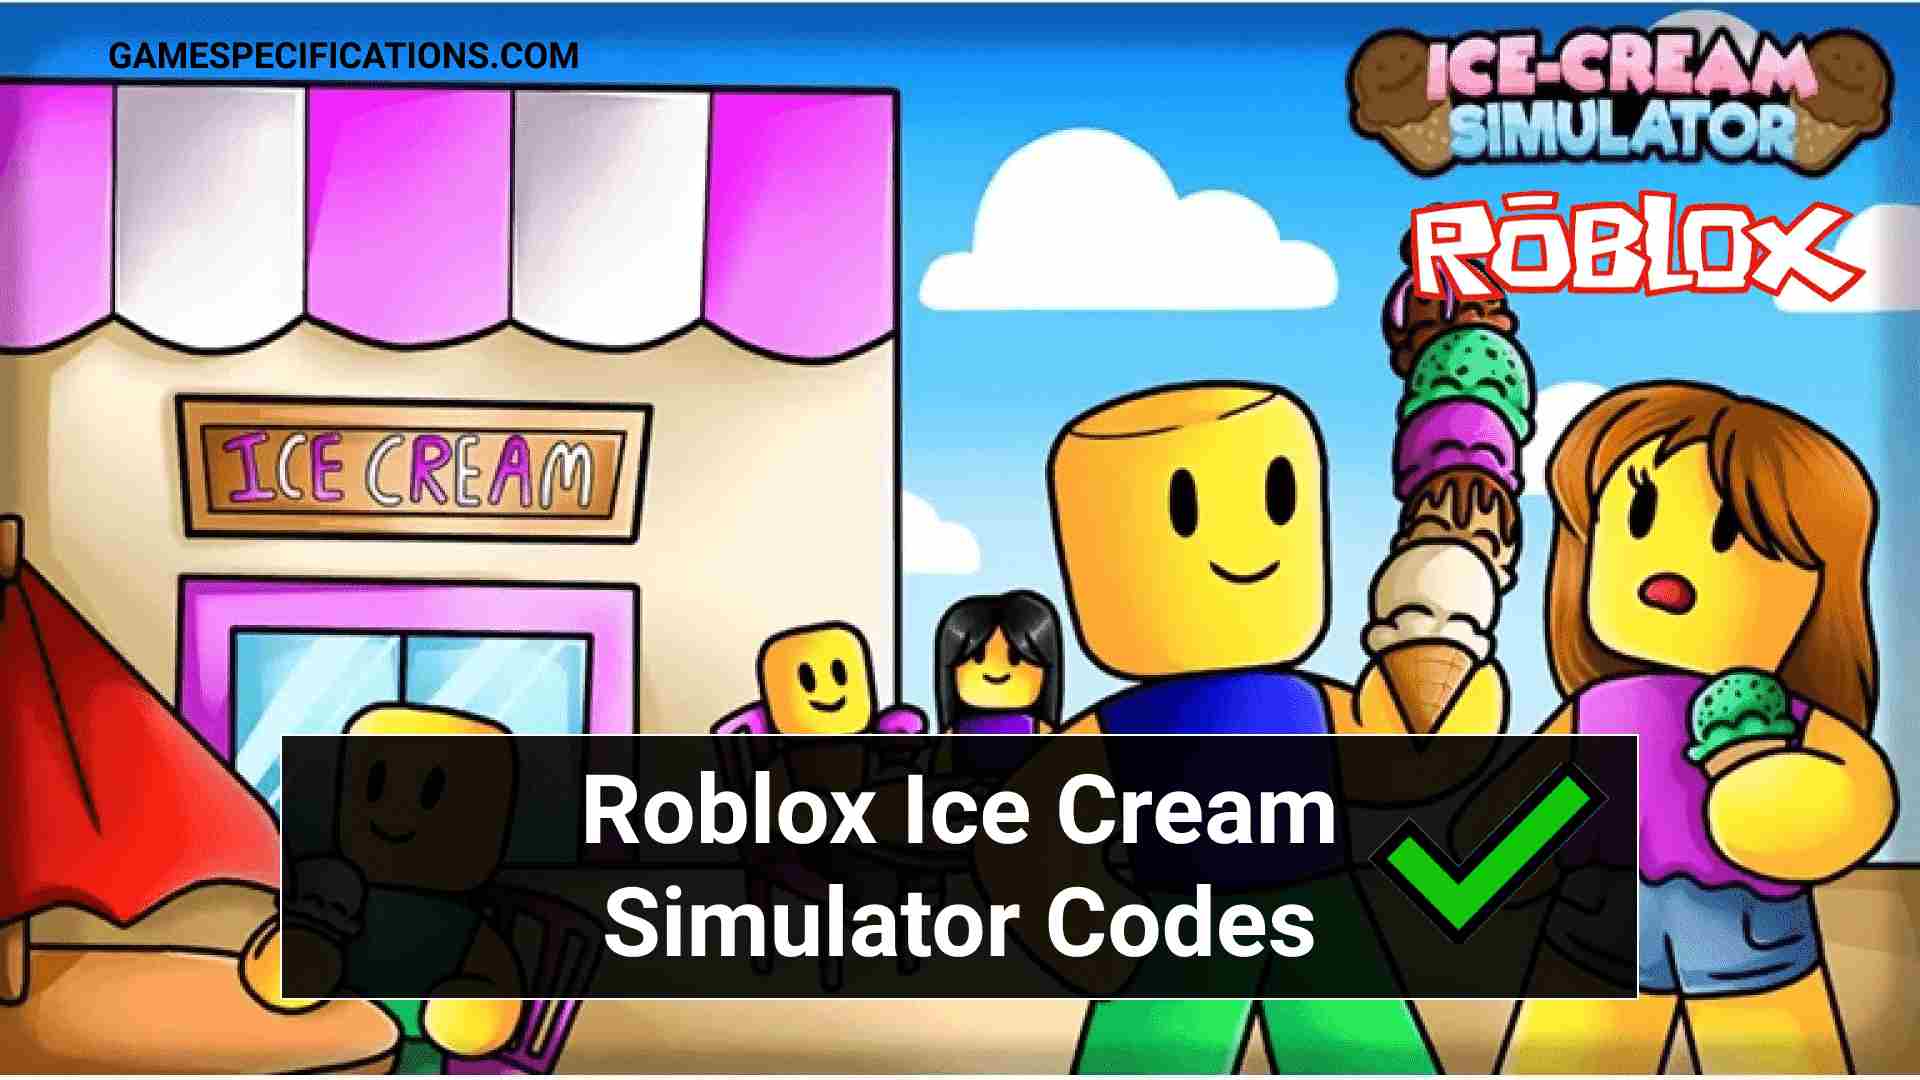 60 Roblox Ice Cream Simulator Codes July 2021 Game Specifications - bucket of ice roblox